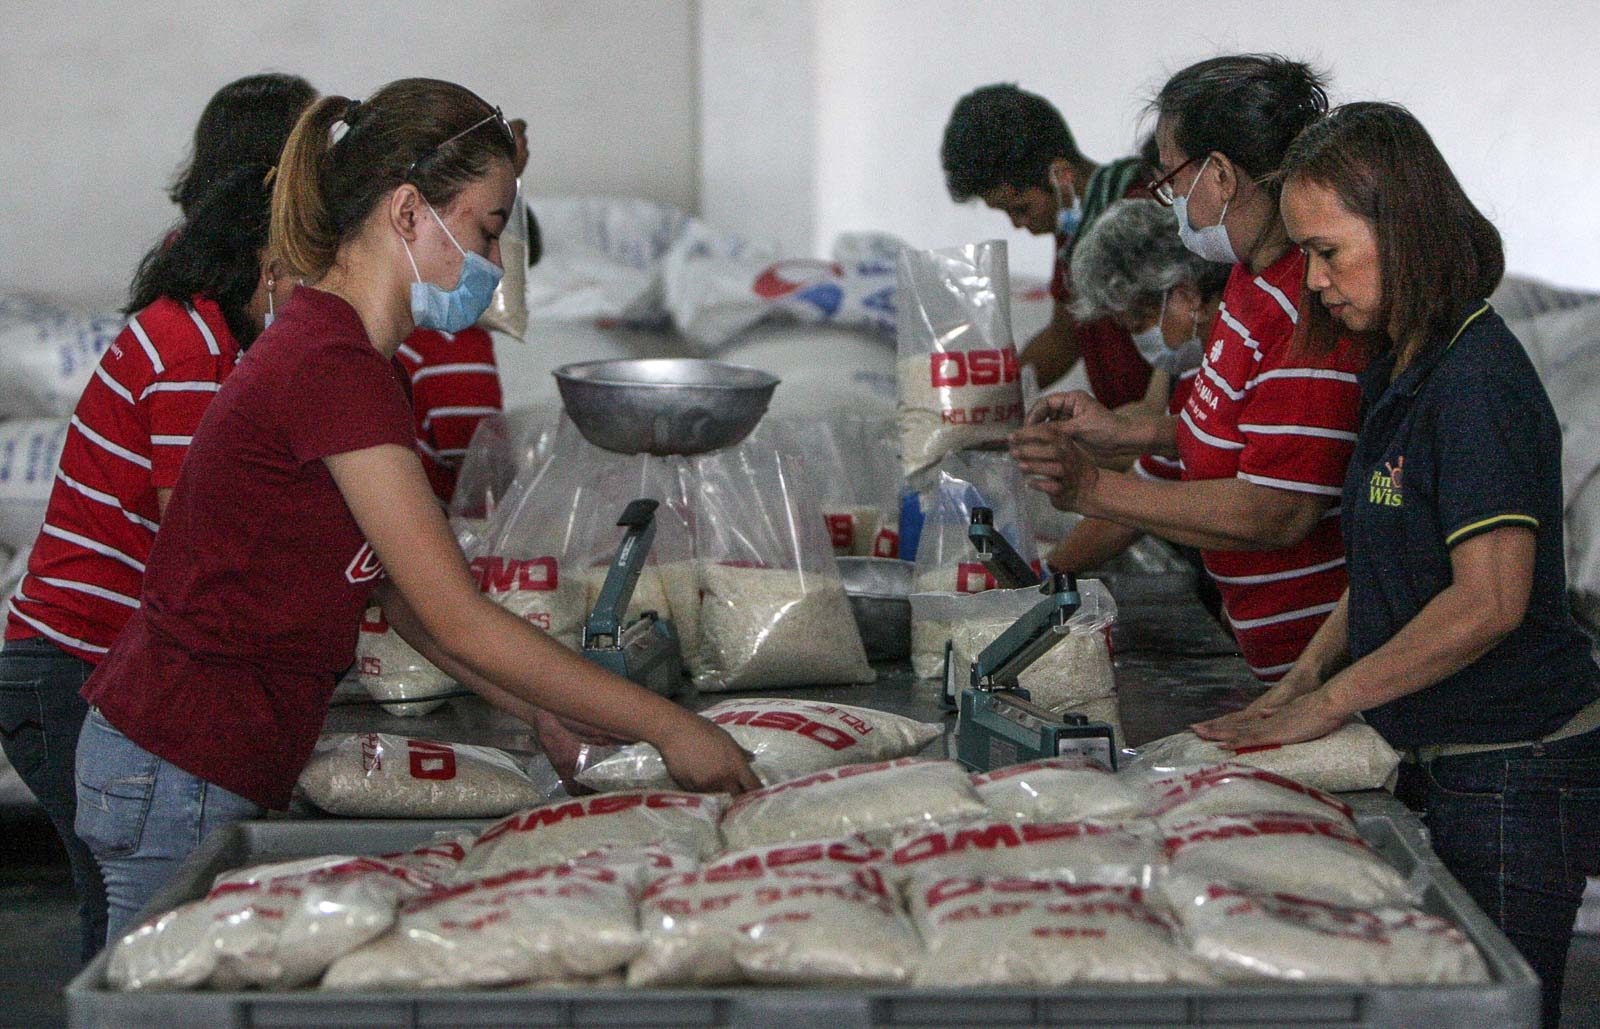 DSWD: Food enough in evacuation centers; focus now on hygiene kits, rehabilitation